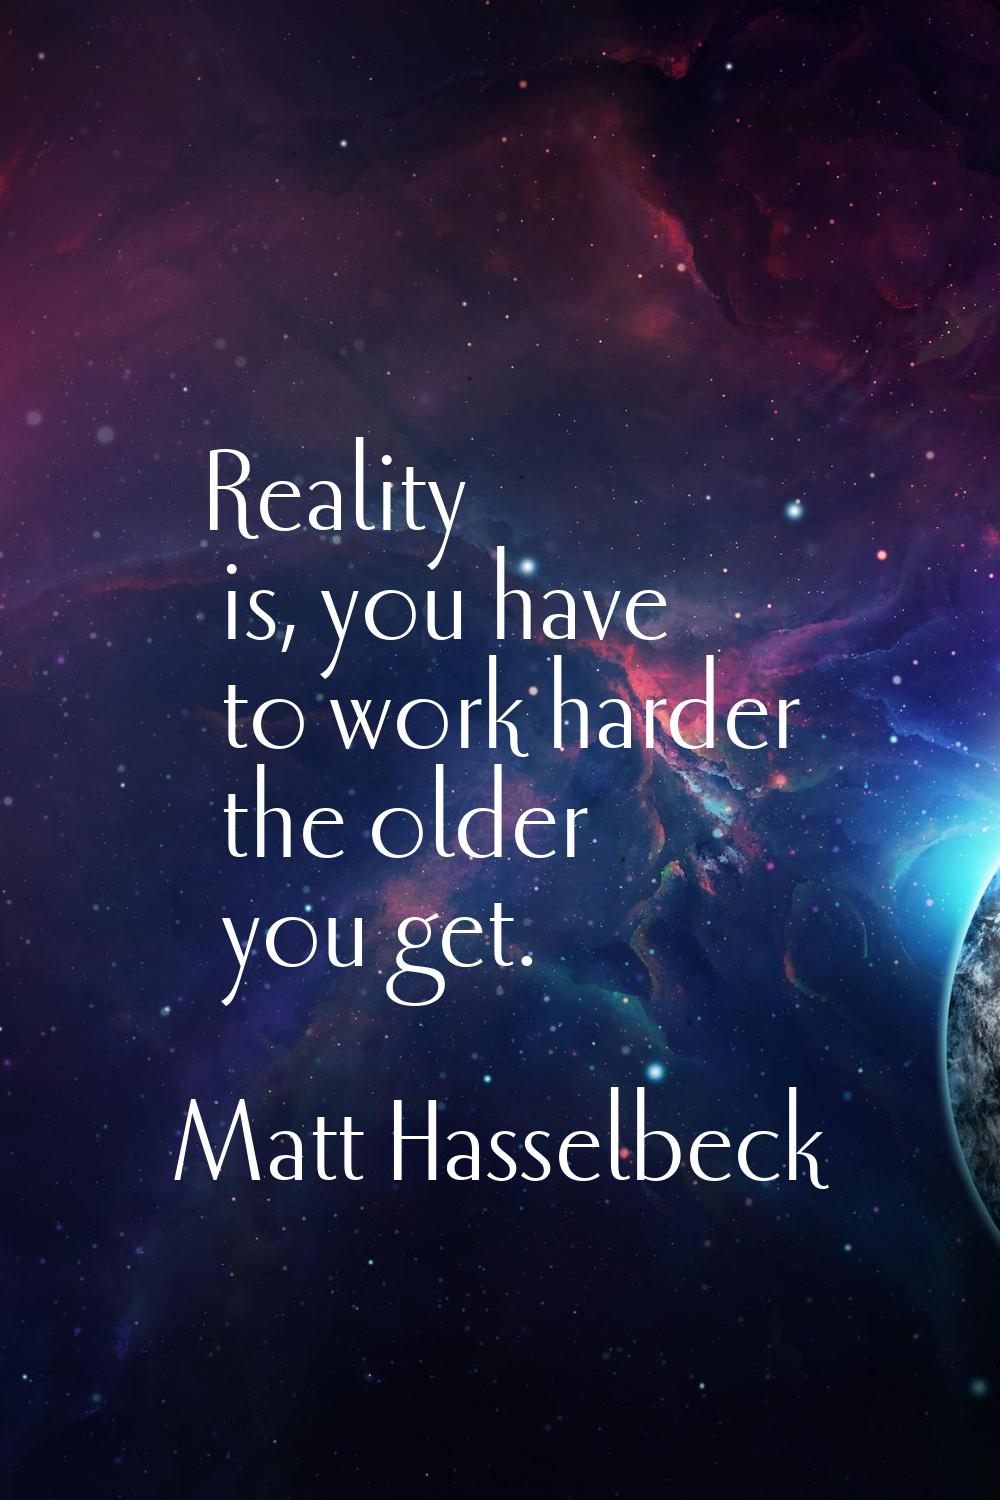 Reality is, you have to work harder the older you get.